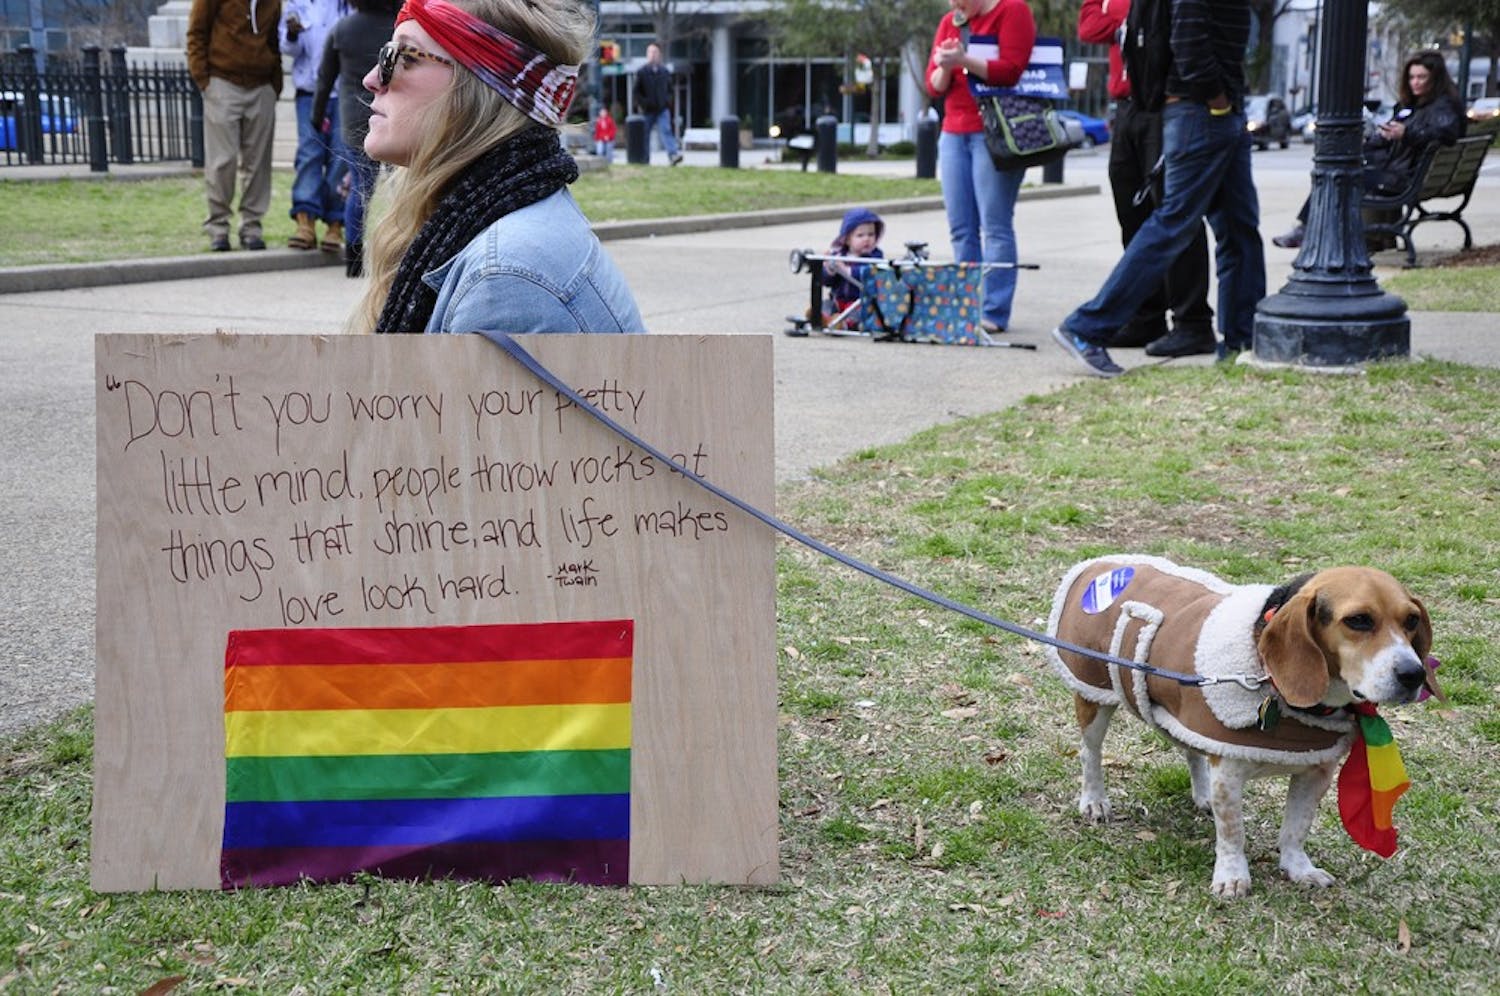 People and pets display the rainbow symbol in support of the LGBT community at the United for Marriage Equality Rally at the Statehouse.